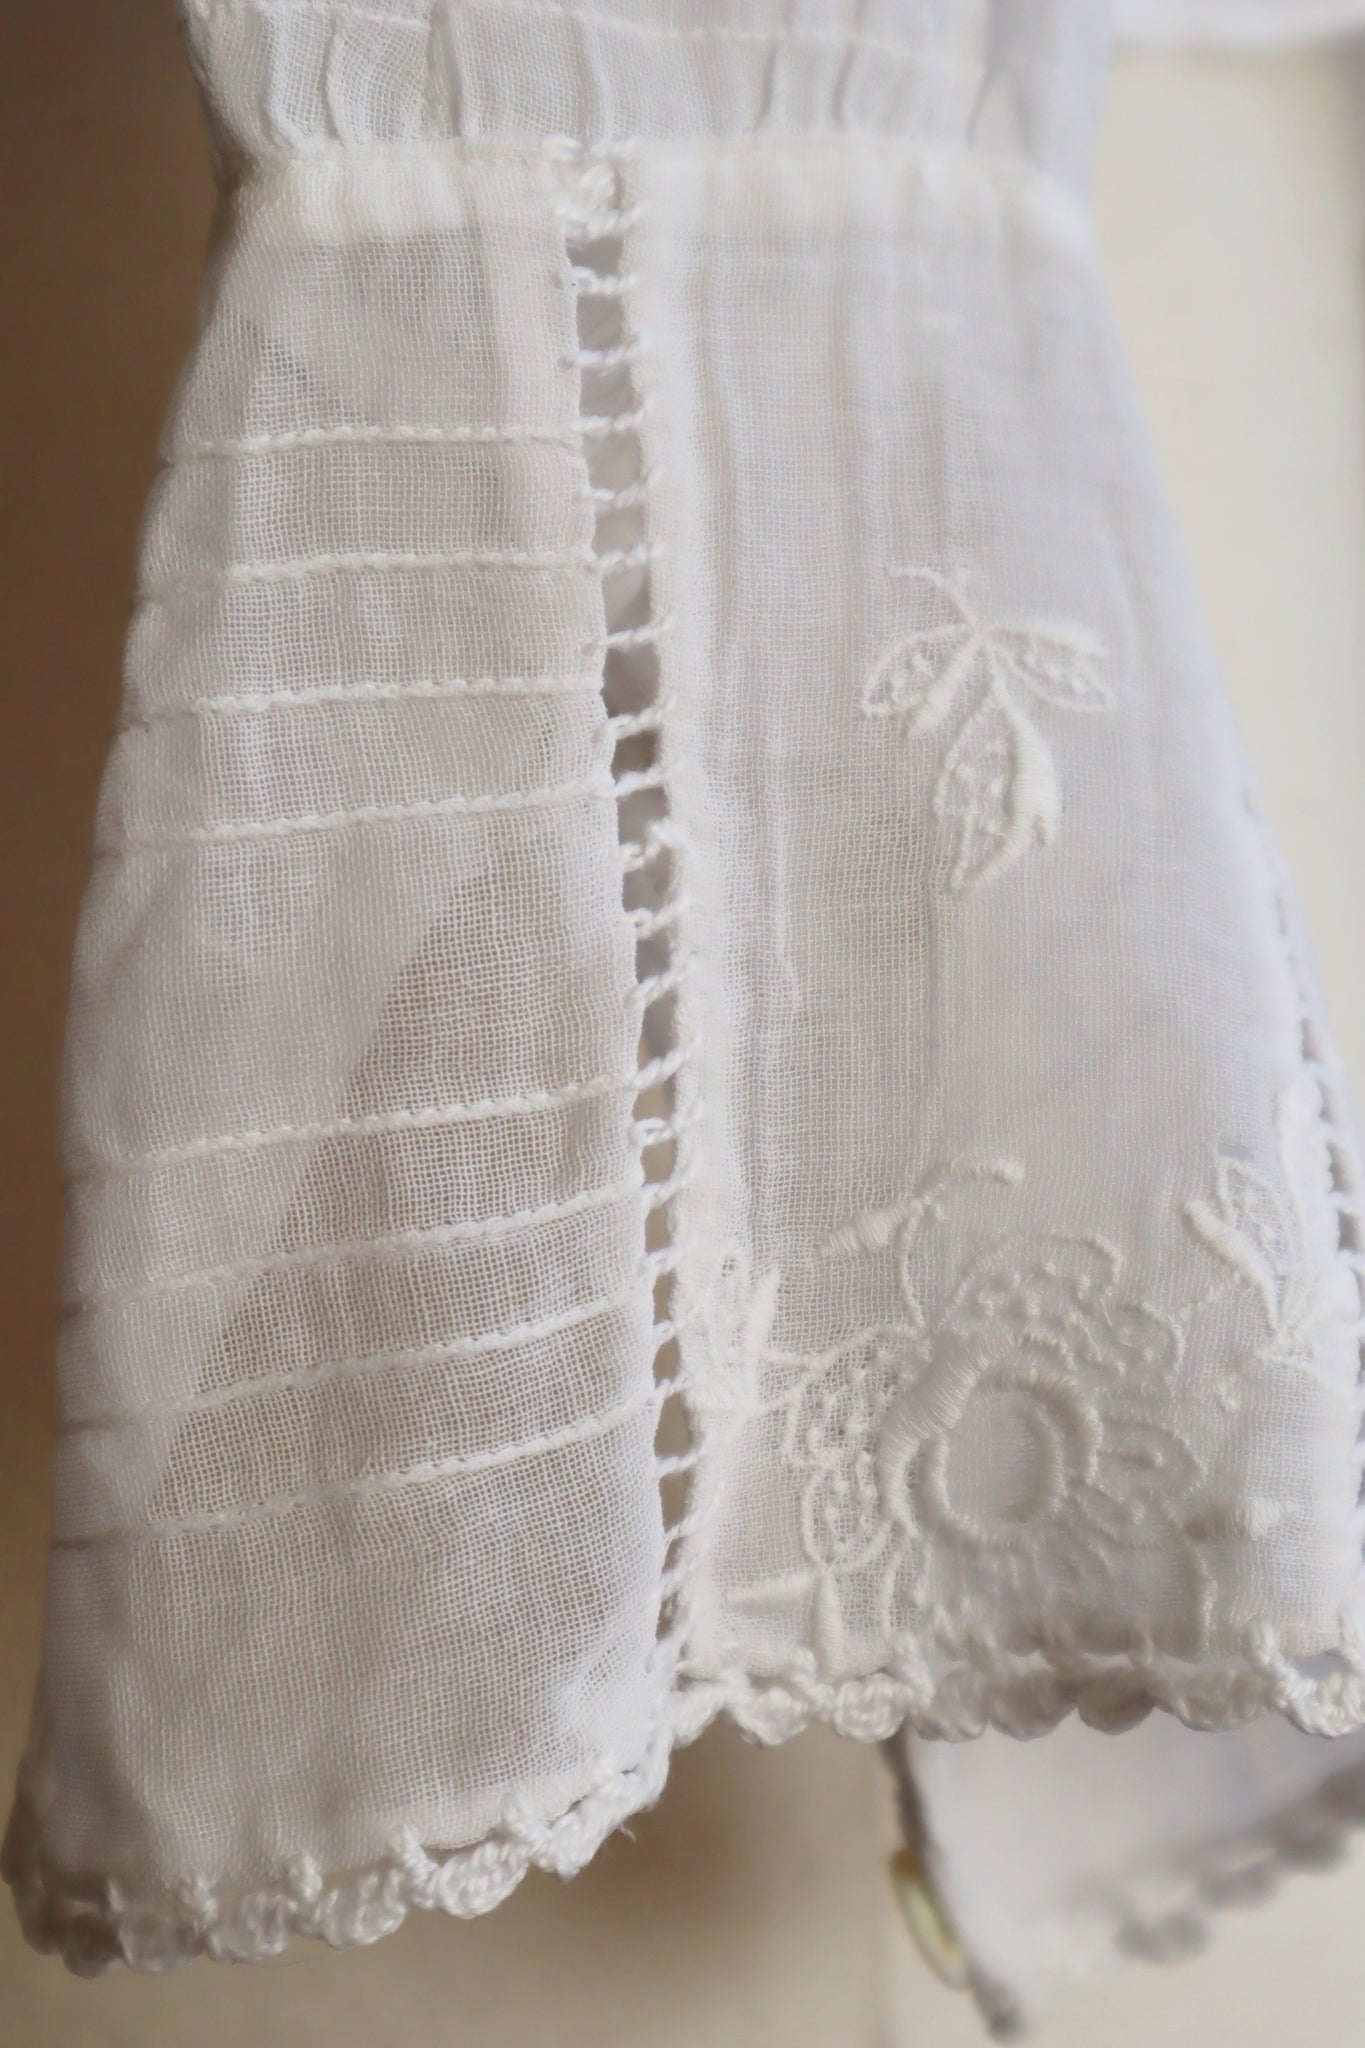 1910s Edwardian White Lawn Cotton Embroidery and Filet Lace Blouse